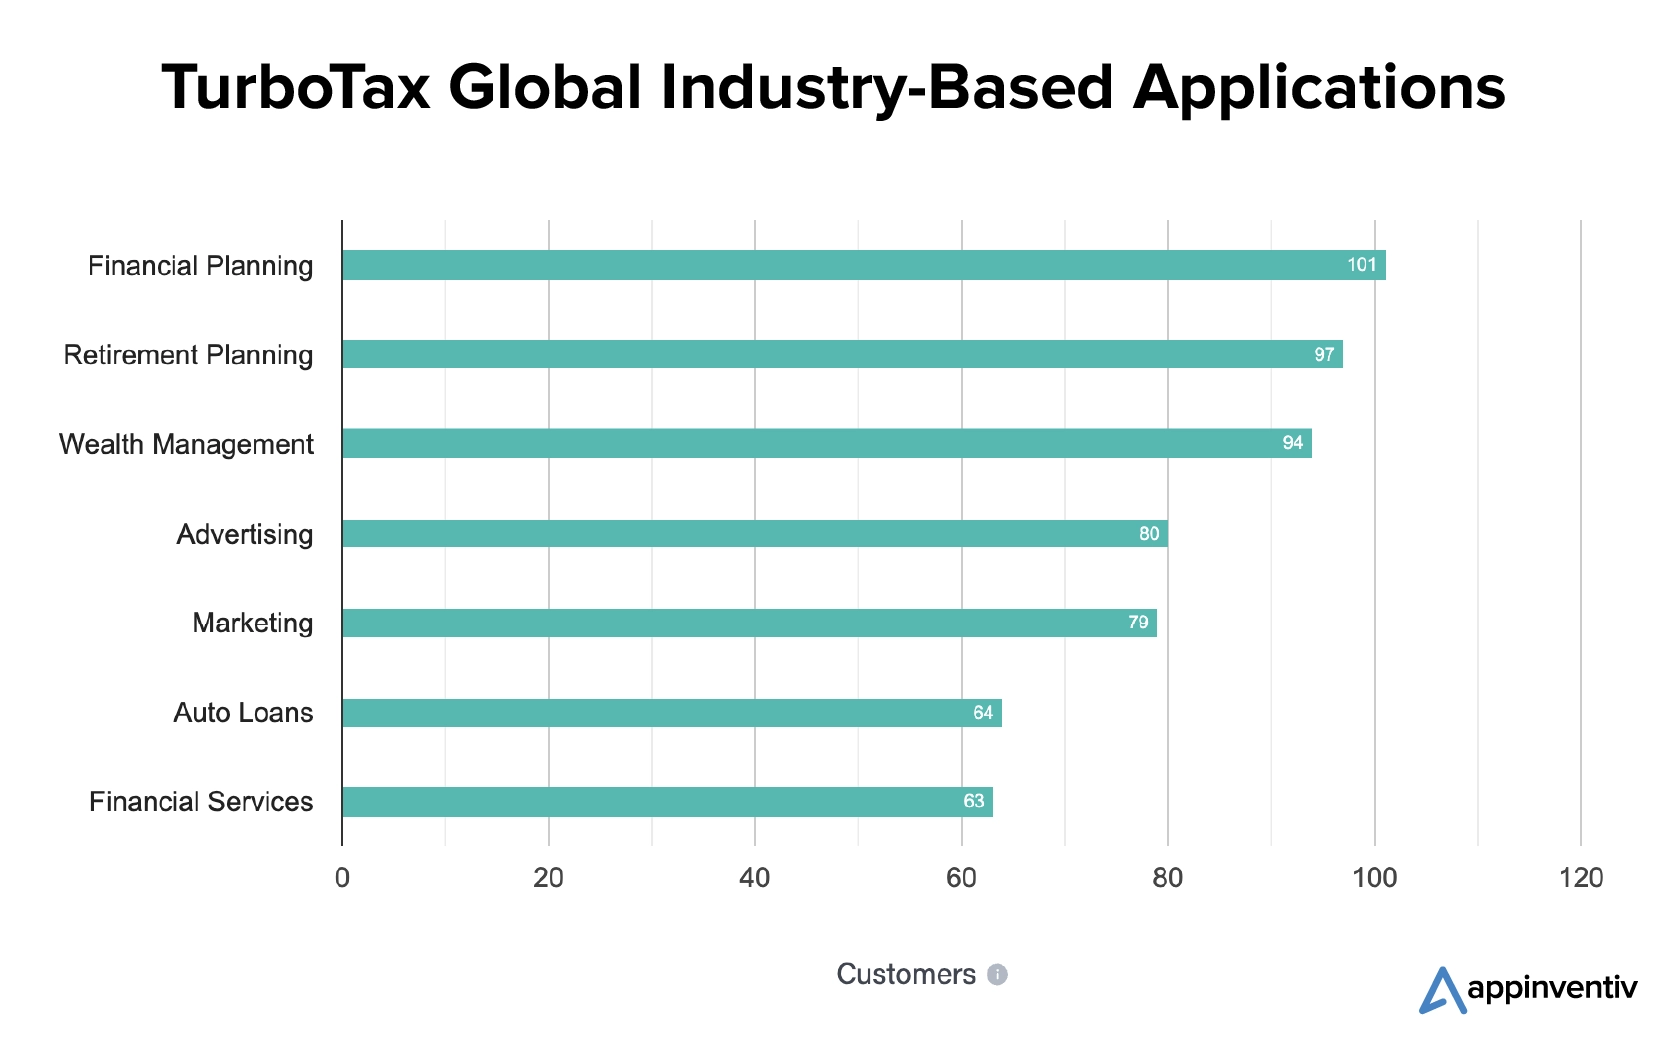 TurboTax Global Industry-Based Applications